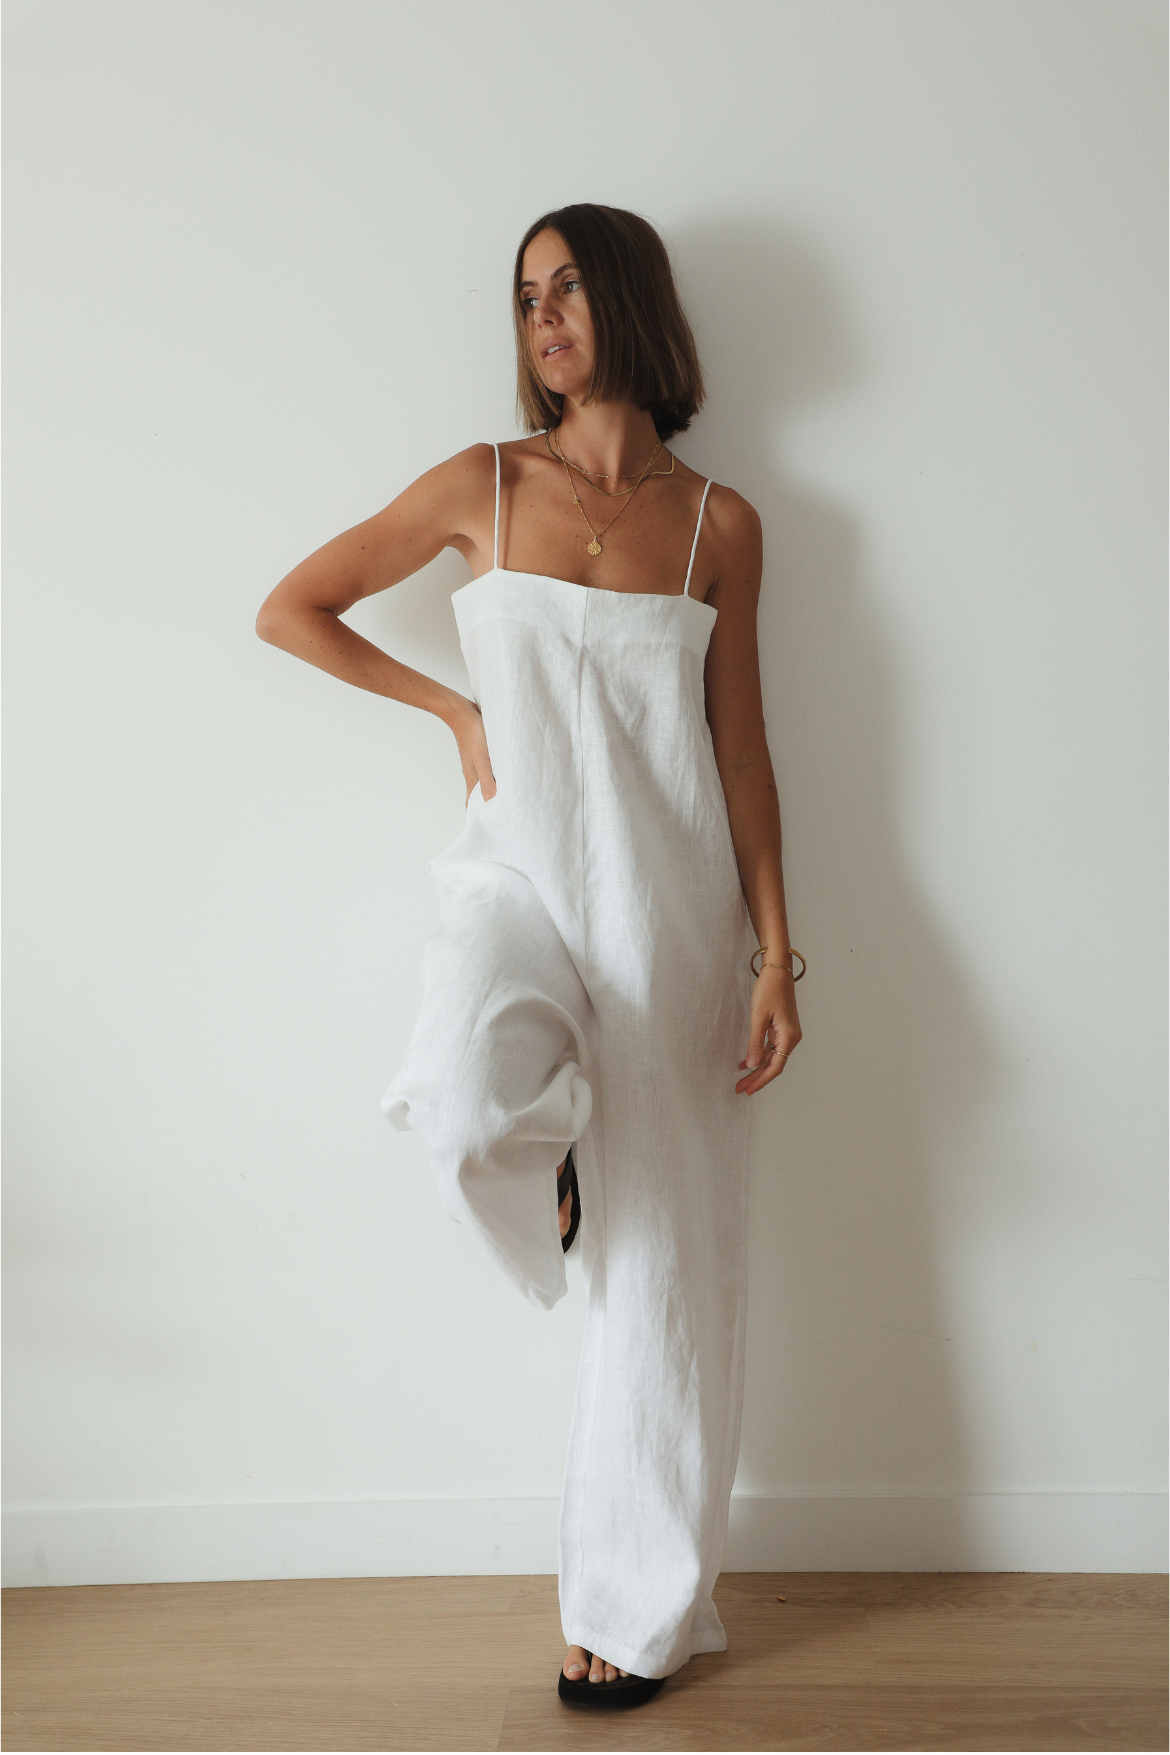 The Ease Iris Jumpsuit - White linen jumpsuit with spaghetti straps, loose fit design with long leg